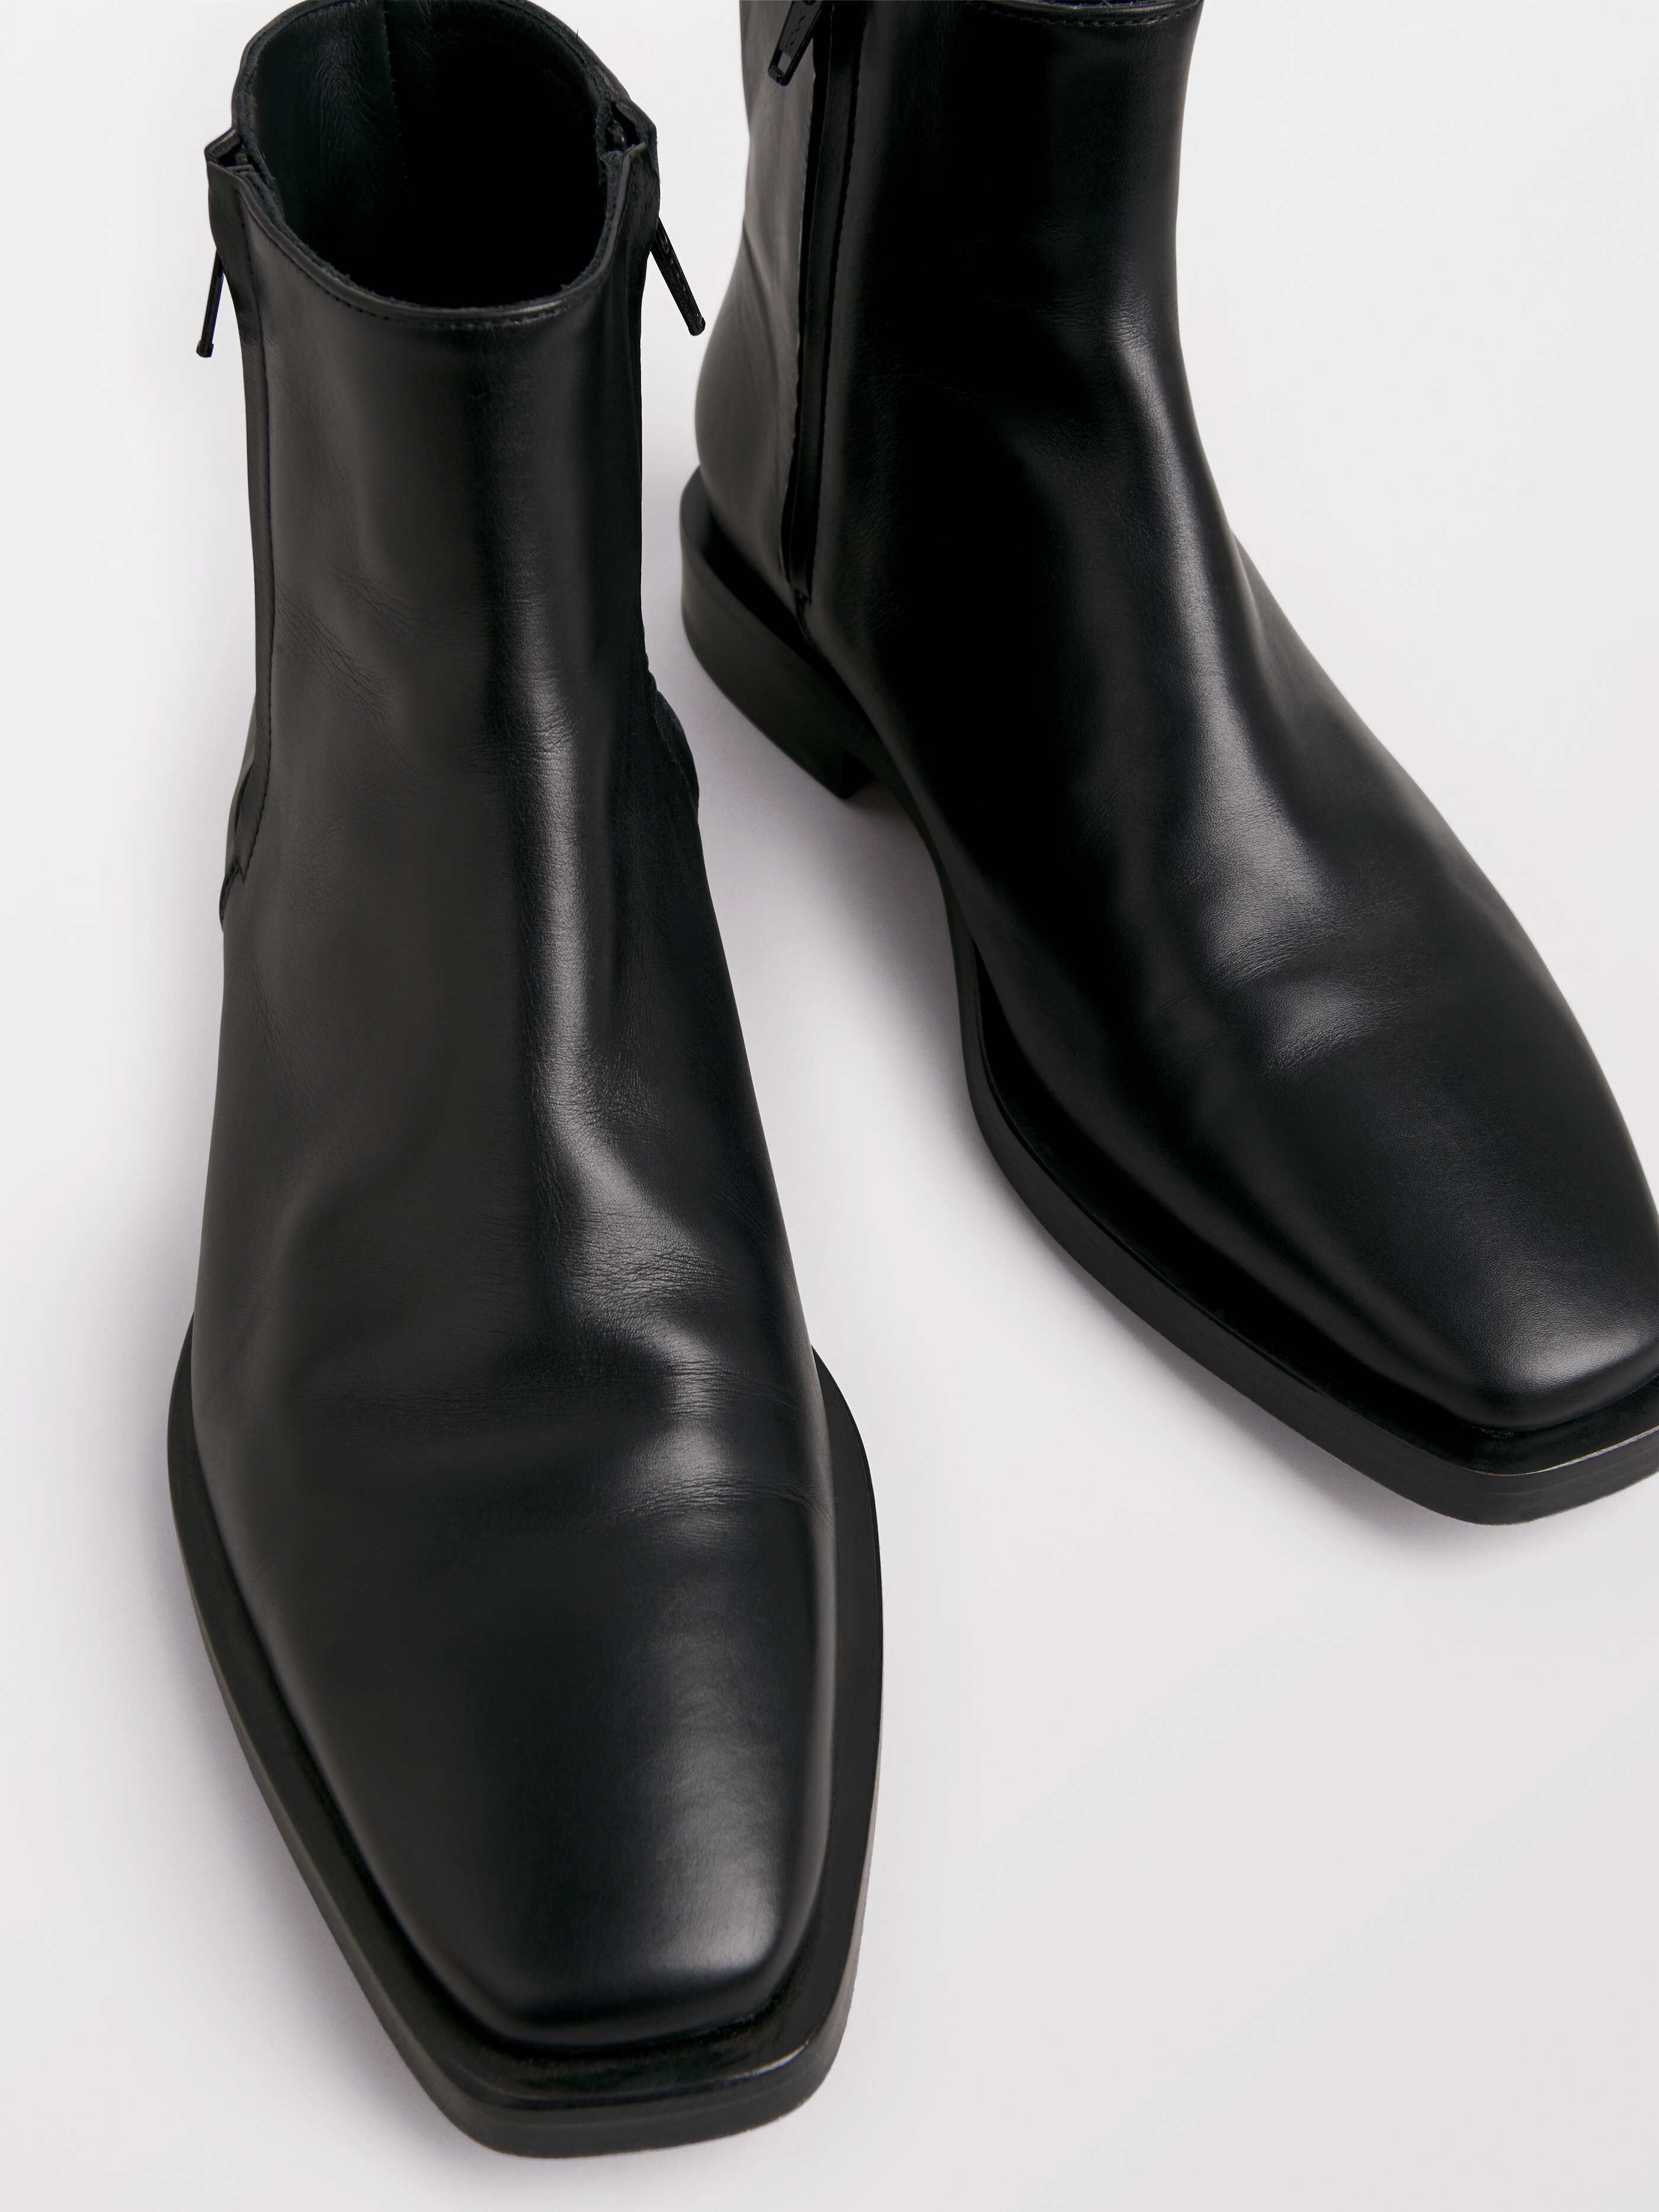 Bartis Boots - Buy Shoes online